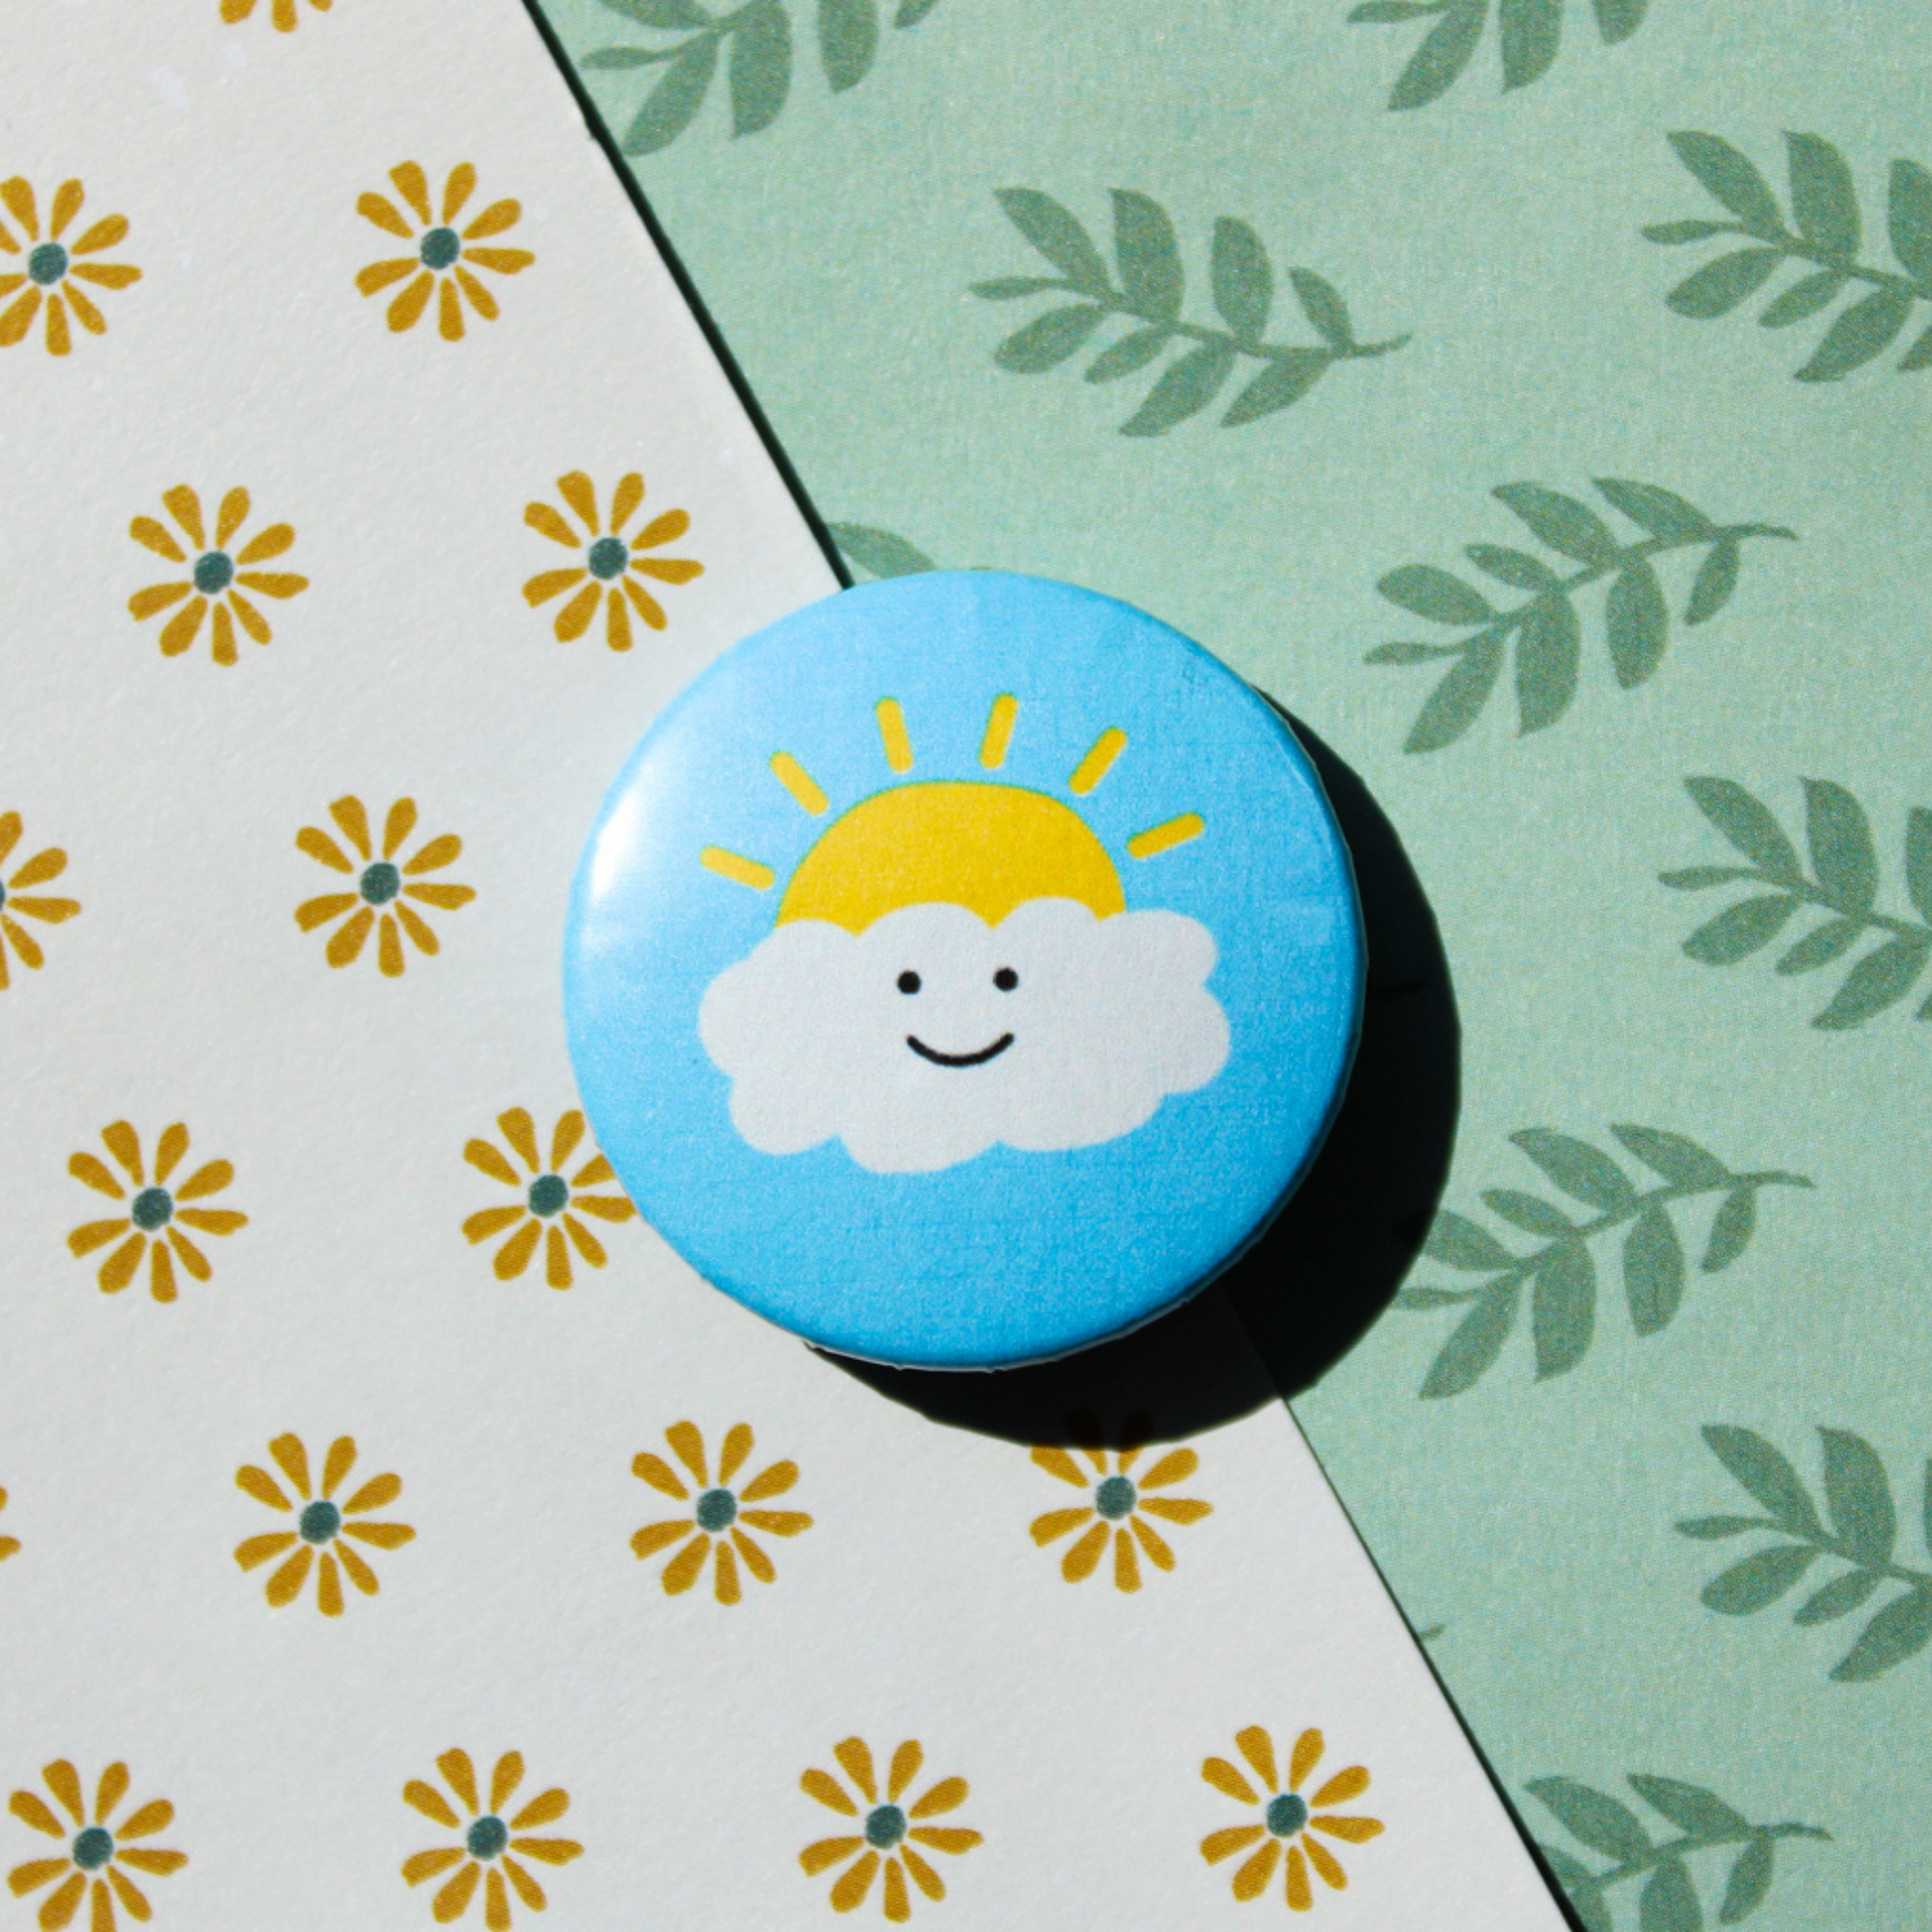 A leaf and floral pattern background. On top is a blue circle button a white smiling cloud and a yellow sun peeping out behind it.